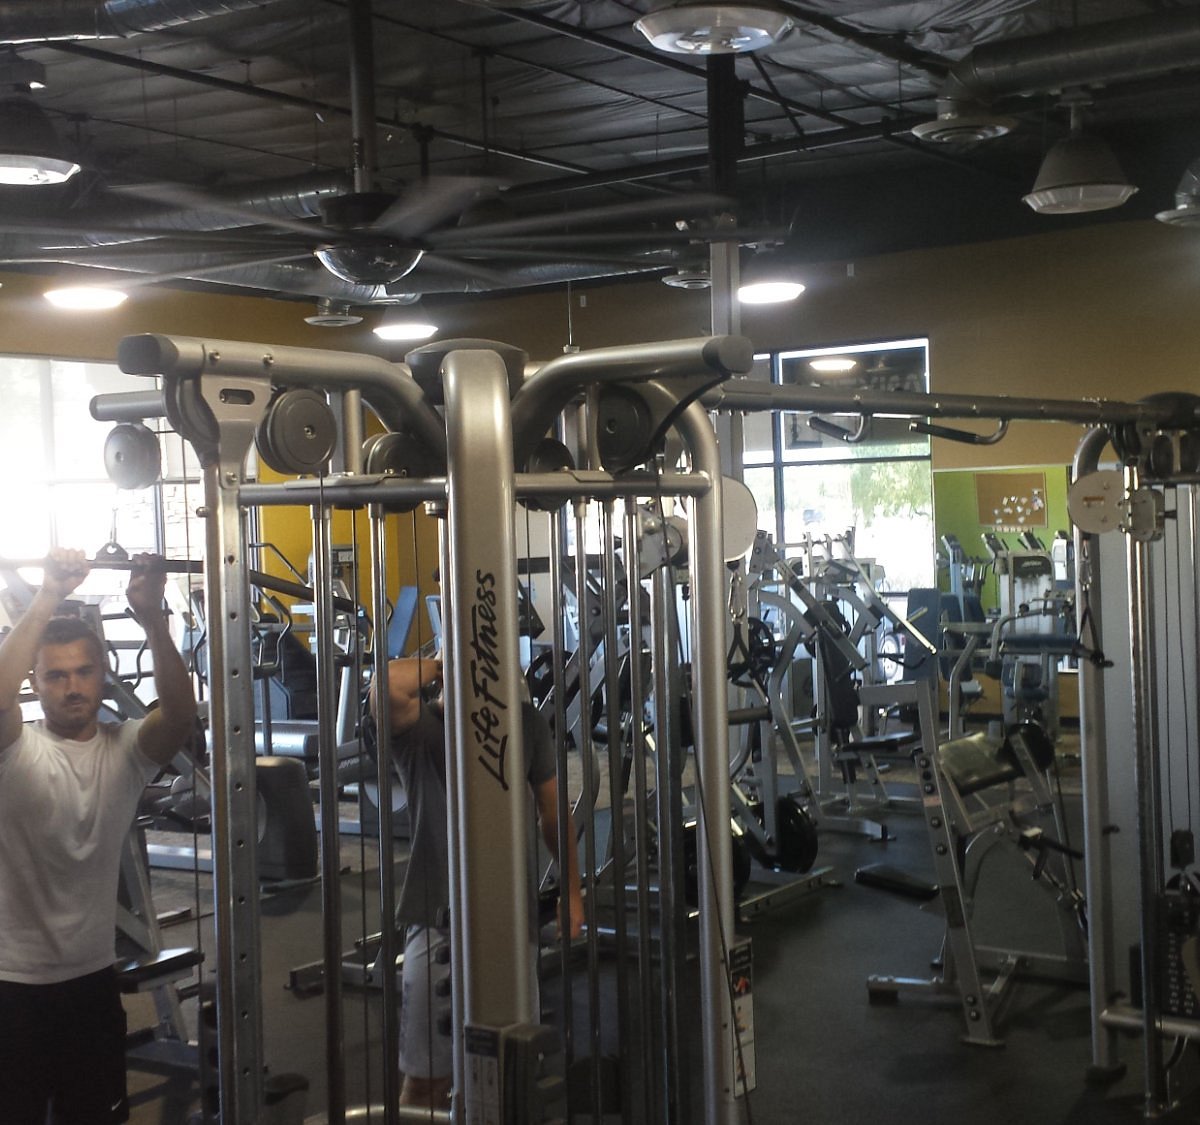 ANYTIME FITNESS - All You Need to Know BEFORE You Go (with Photos)